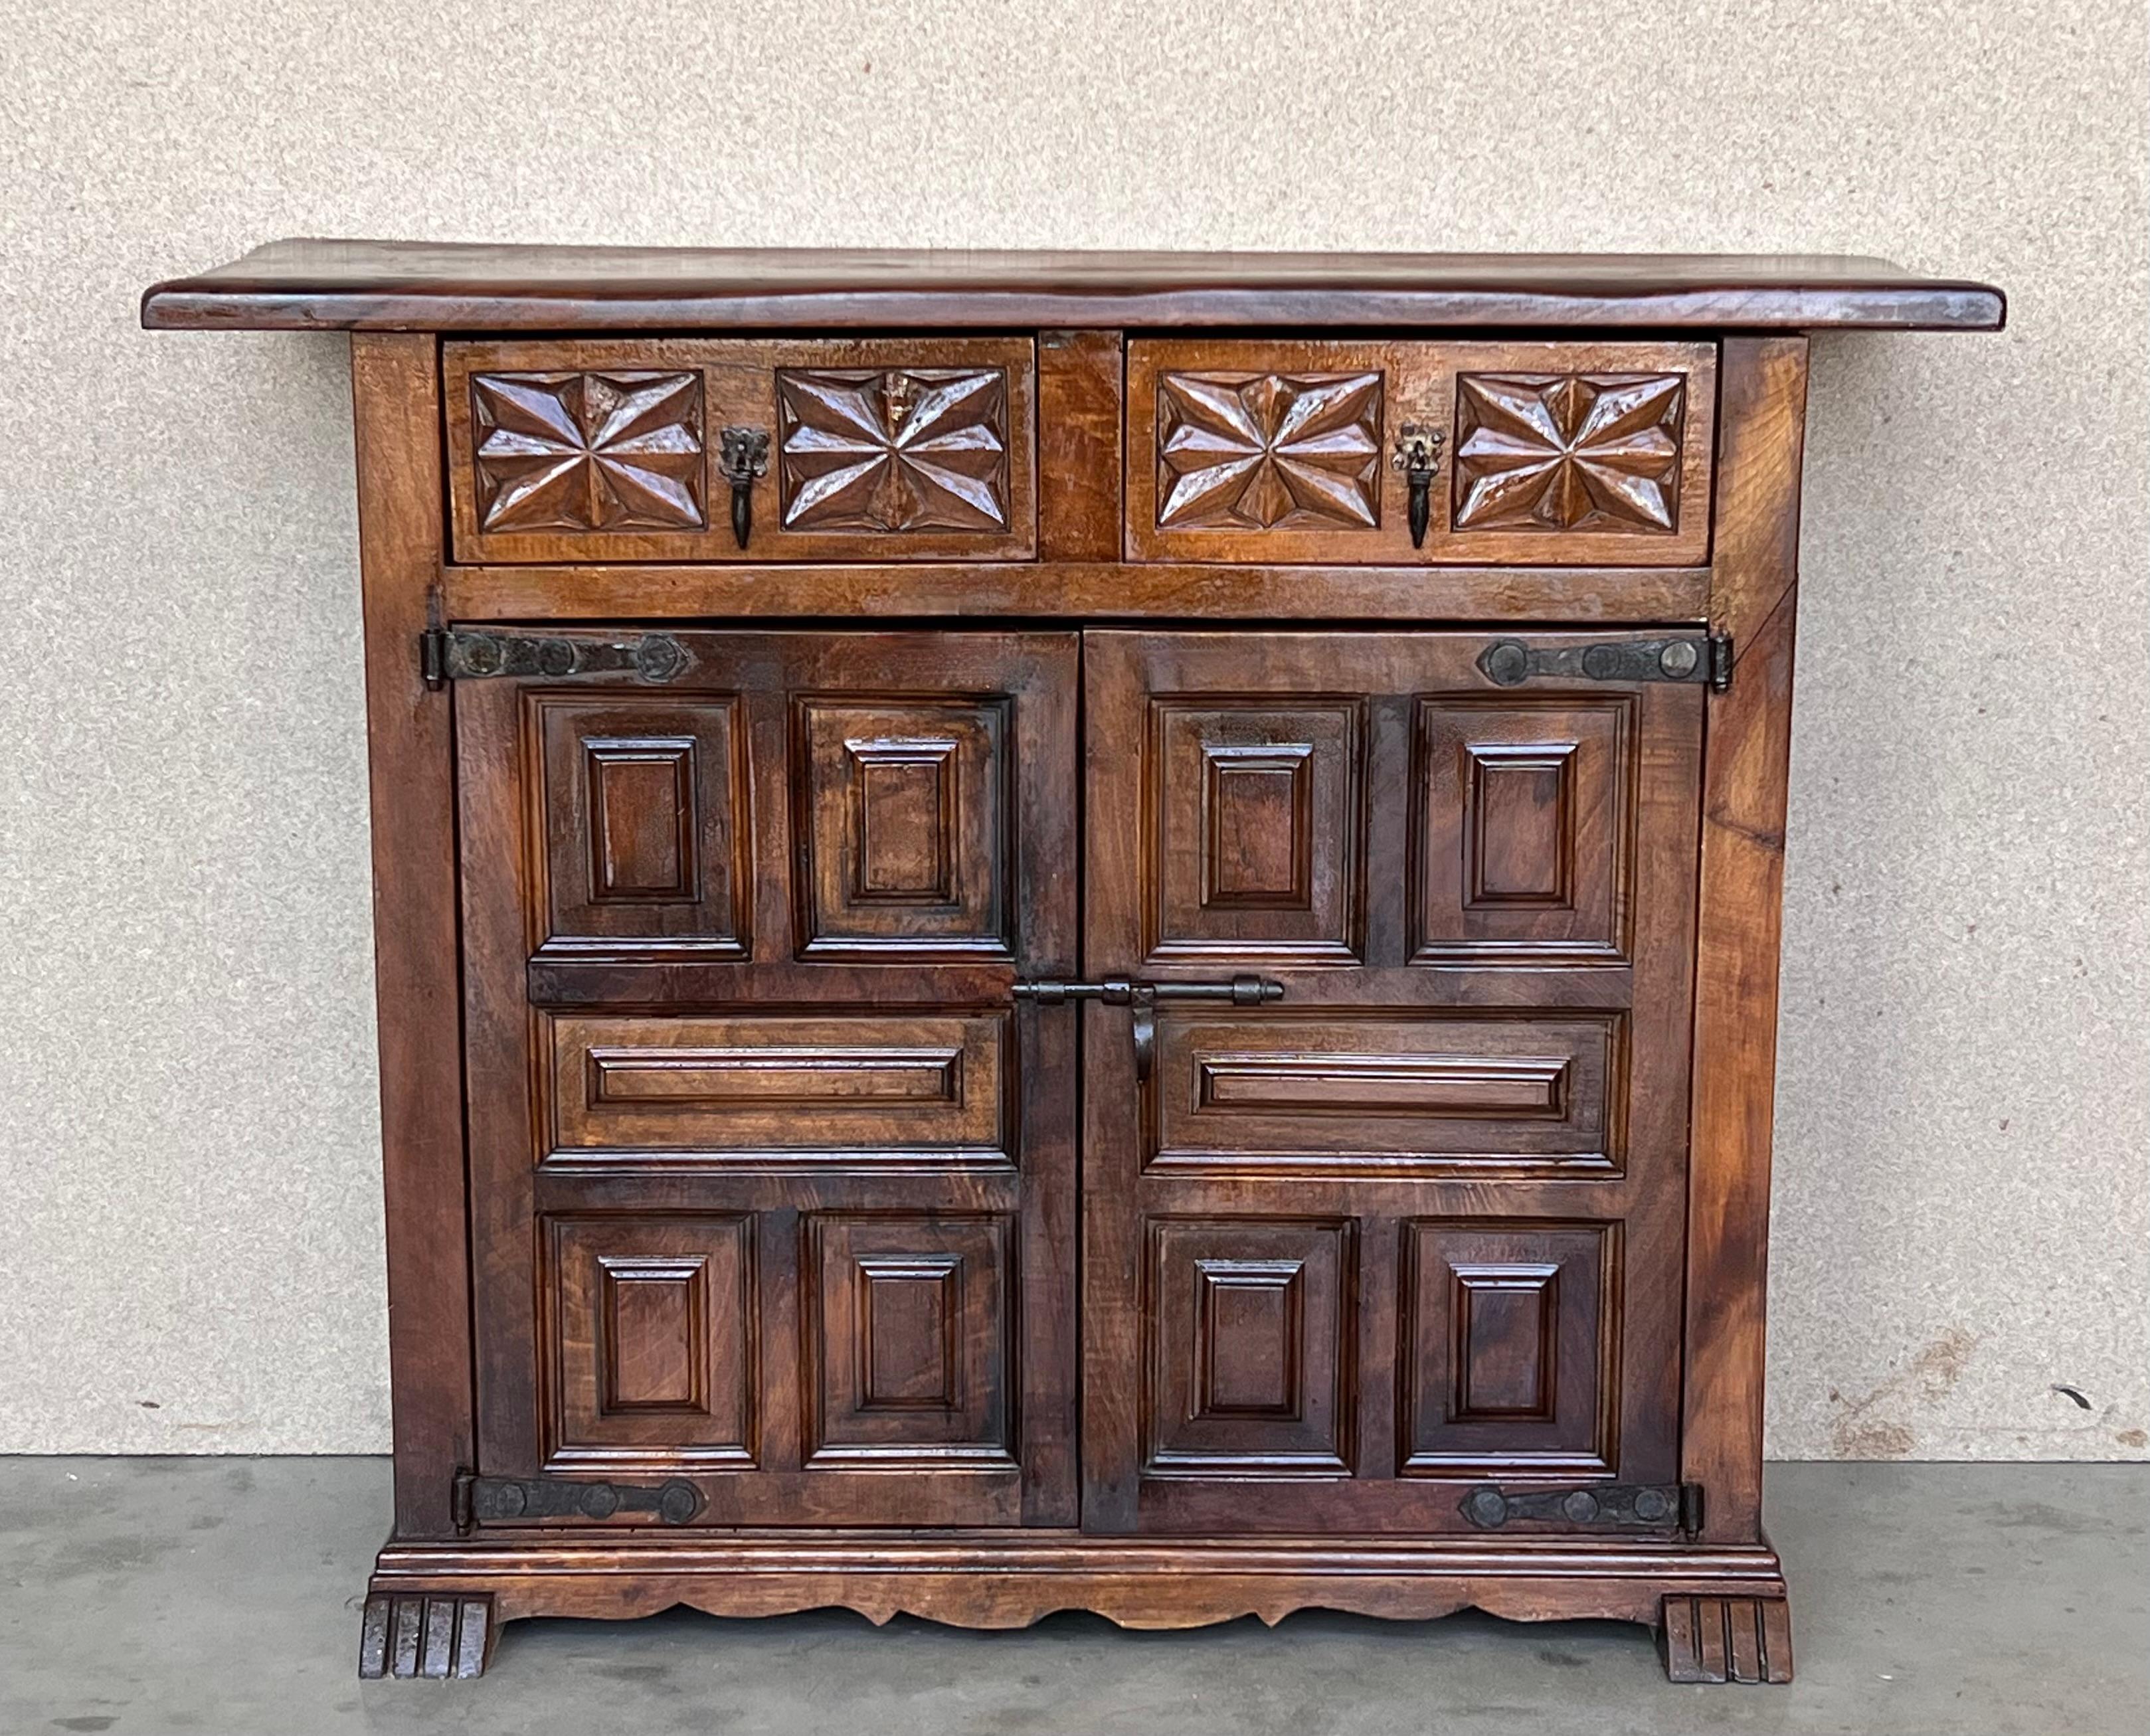 Spanish Colonial 20th Century Spanish Carved Walnut Tuscan Credenza or Buffet with Two Drawers